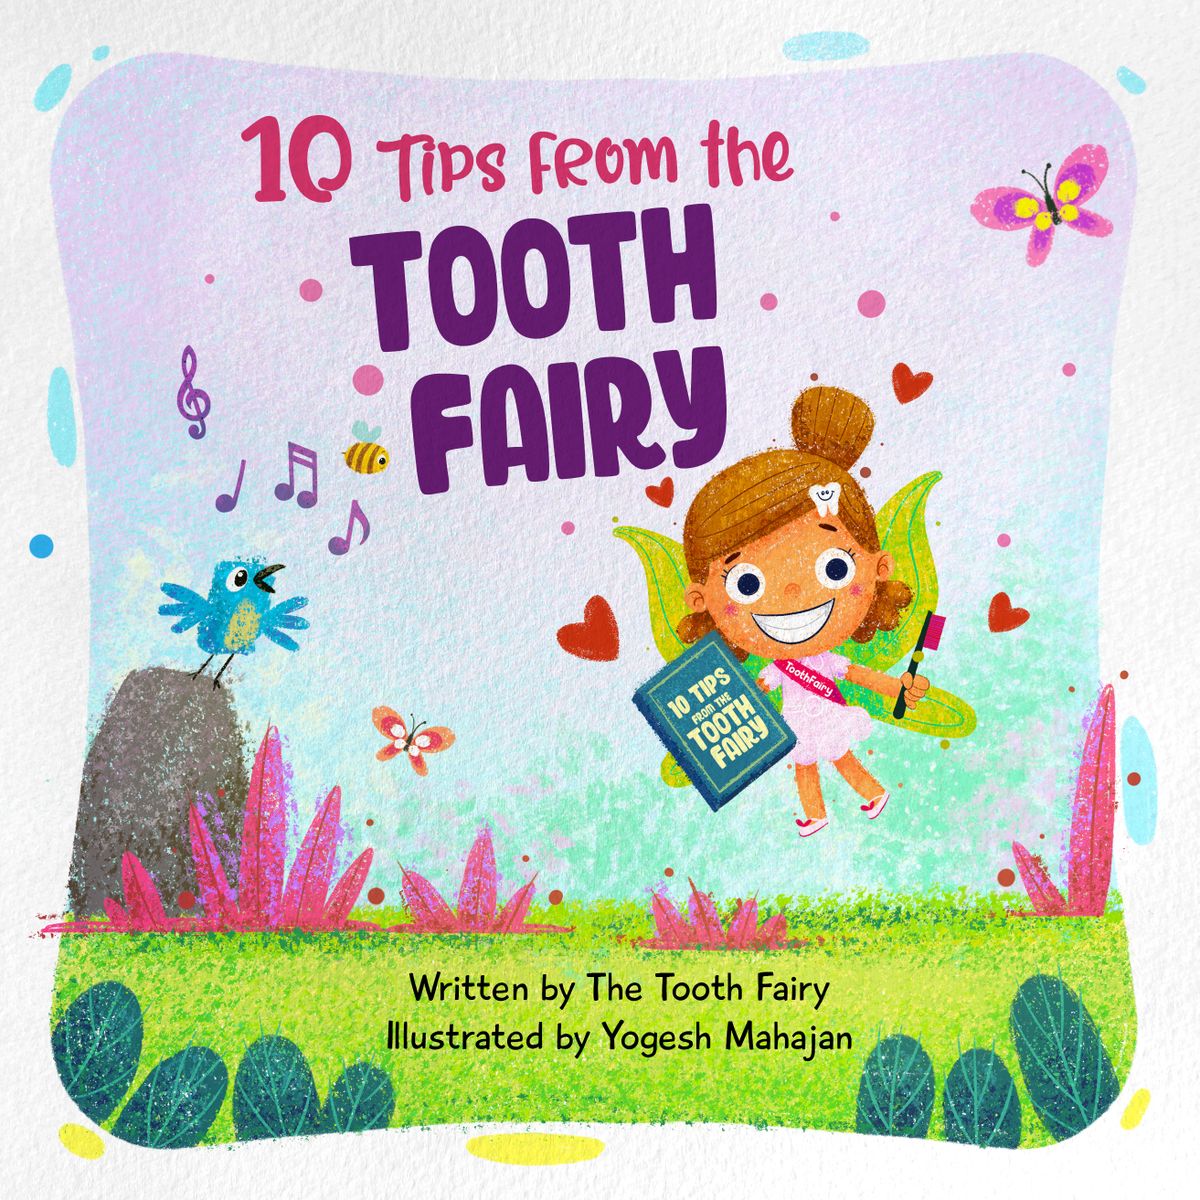 “10 Tips from the Tooth Fairy,” by Edie Higby (or the Tooth Fairy) and illustrated by Yogesh Mahajan.  (Courtesy)